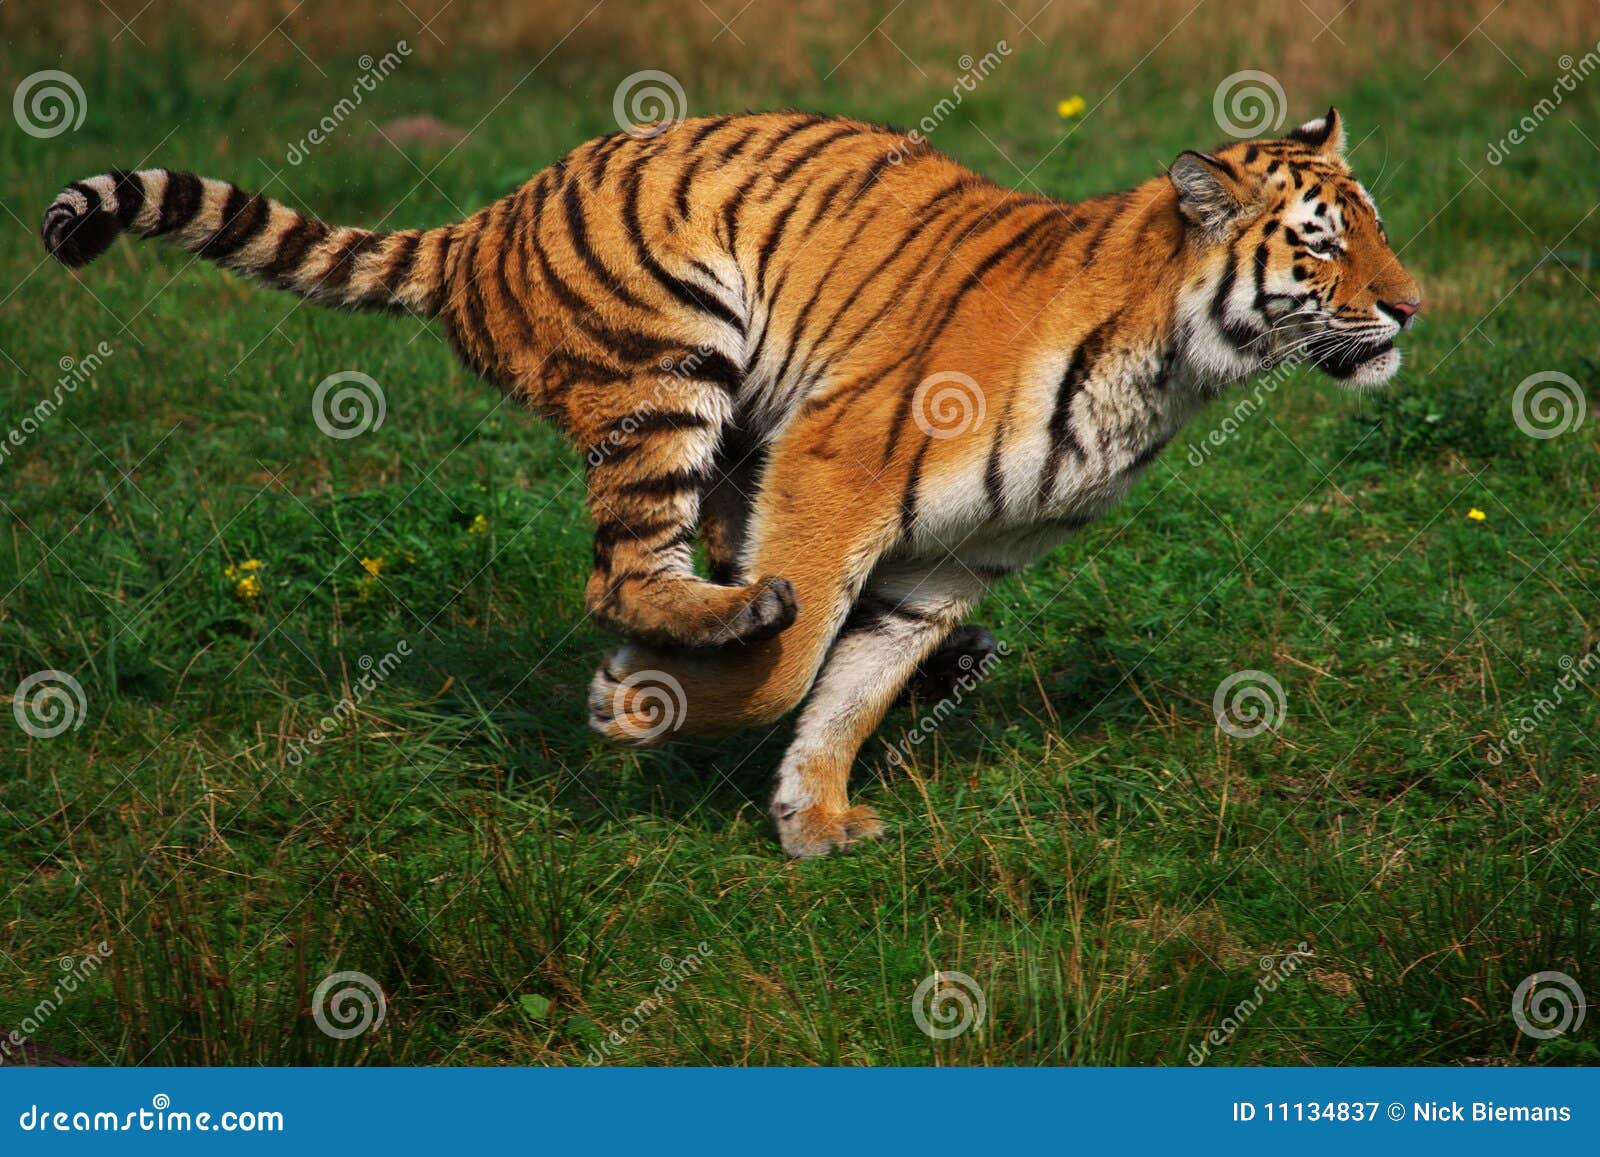 Siberian Tiger Running. Beautiful, Dynamic And Powerful Photo Of This ...